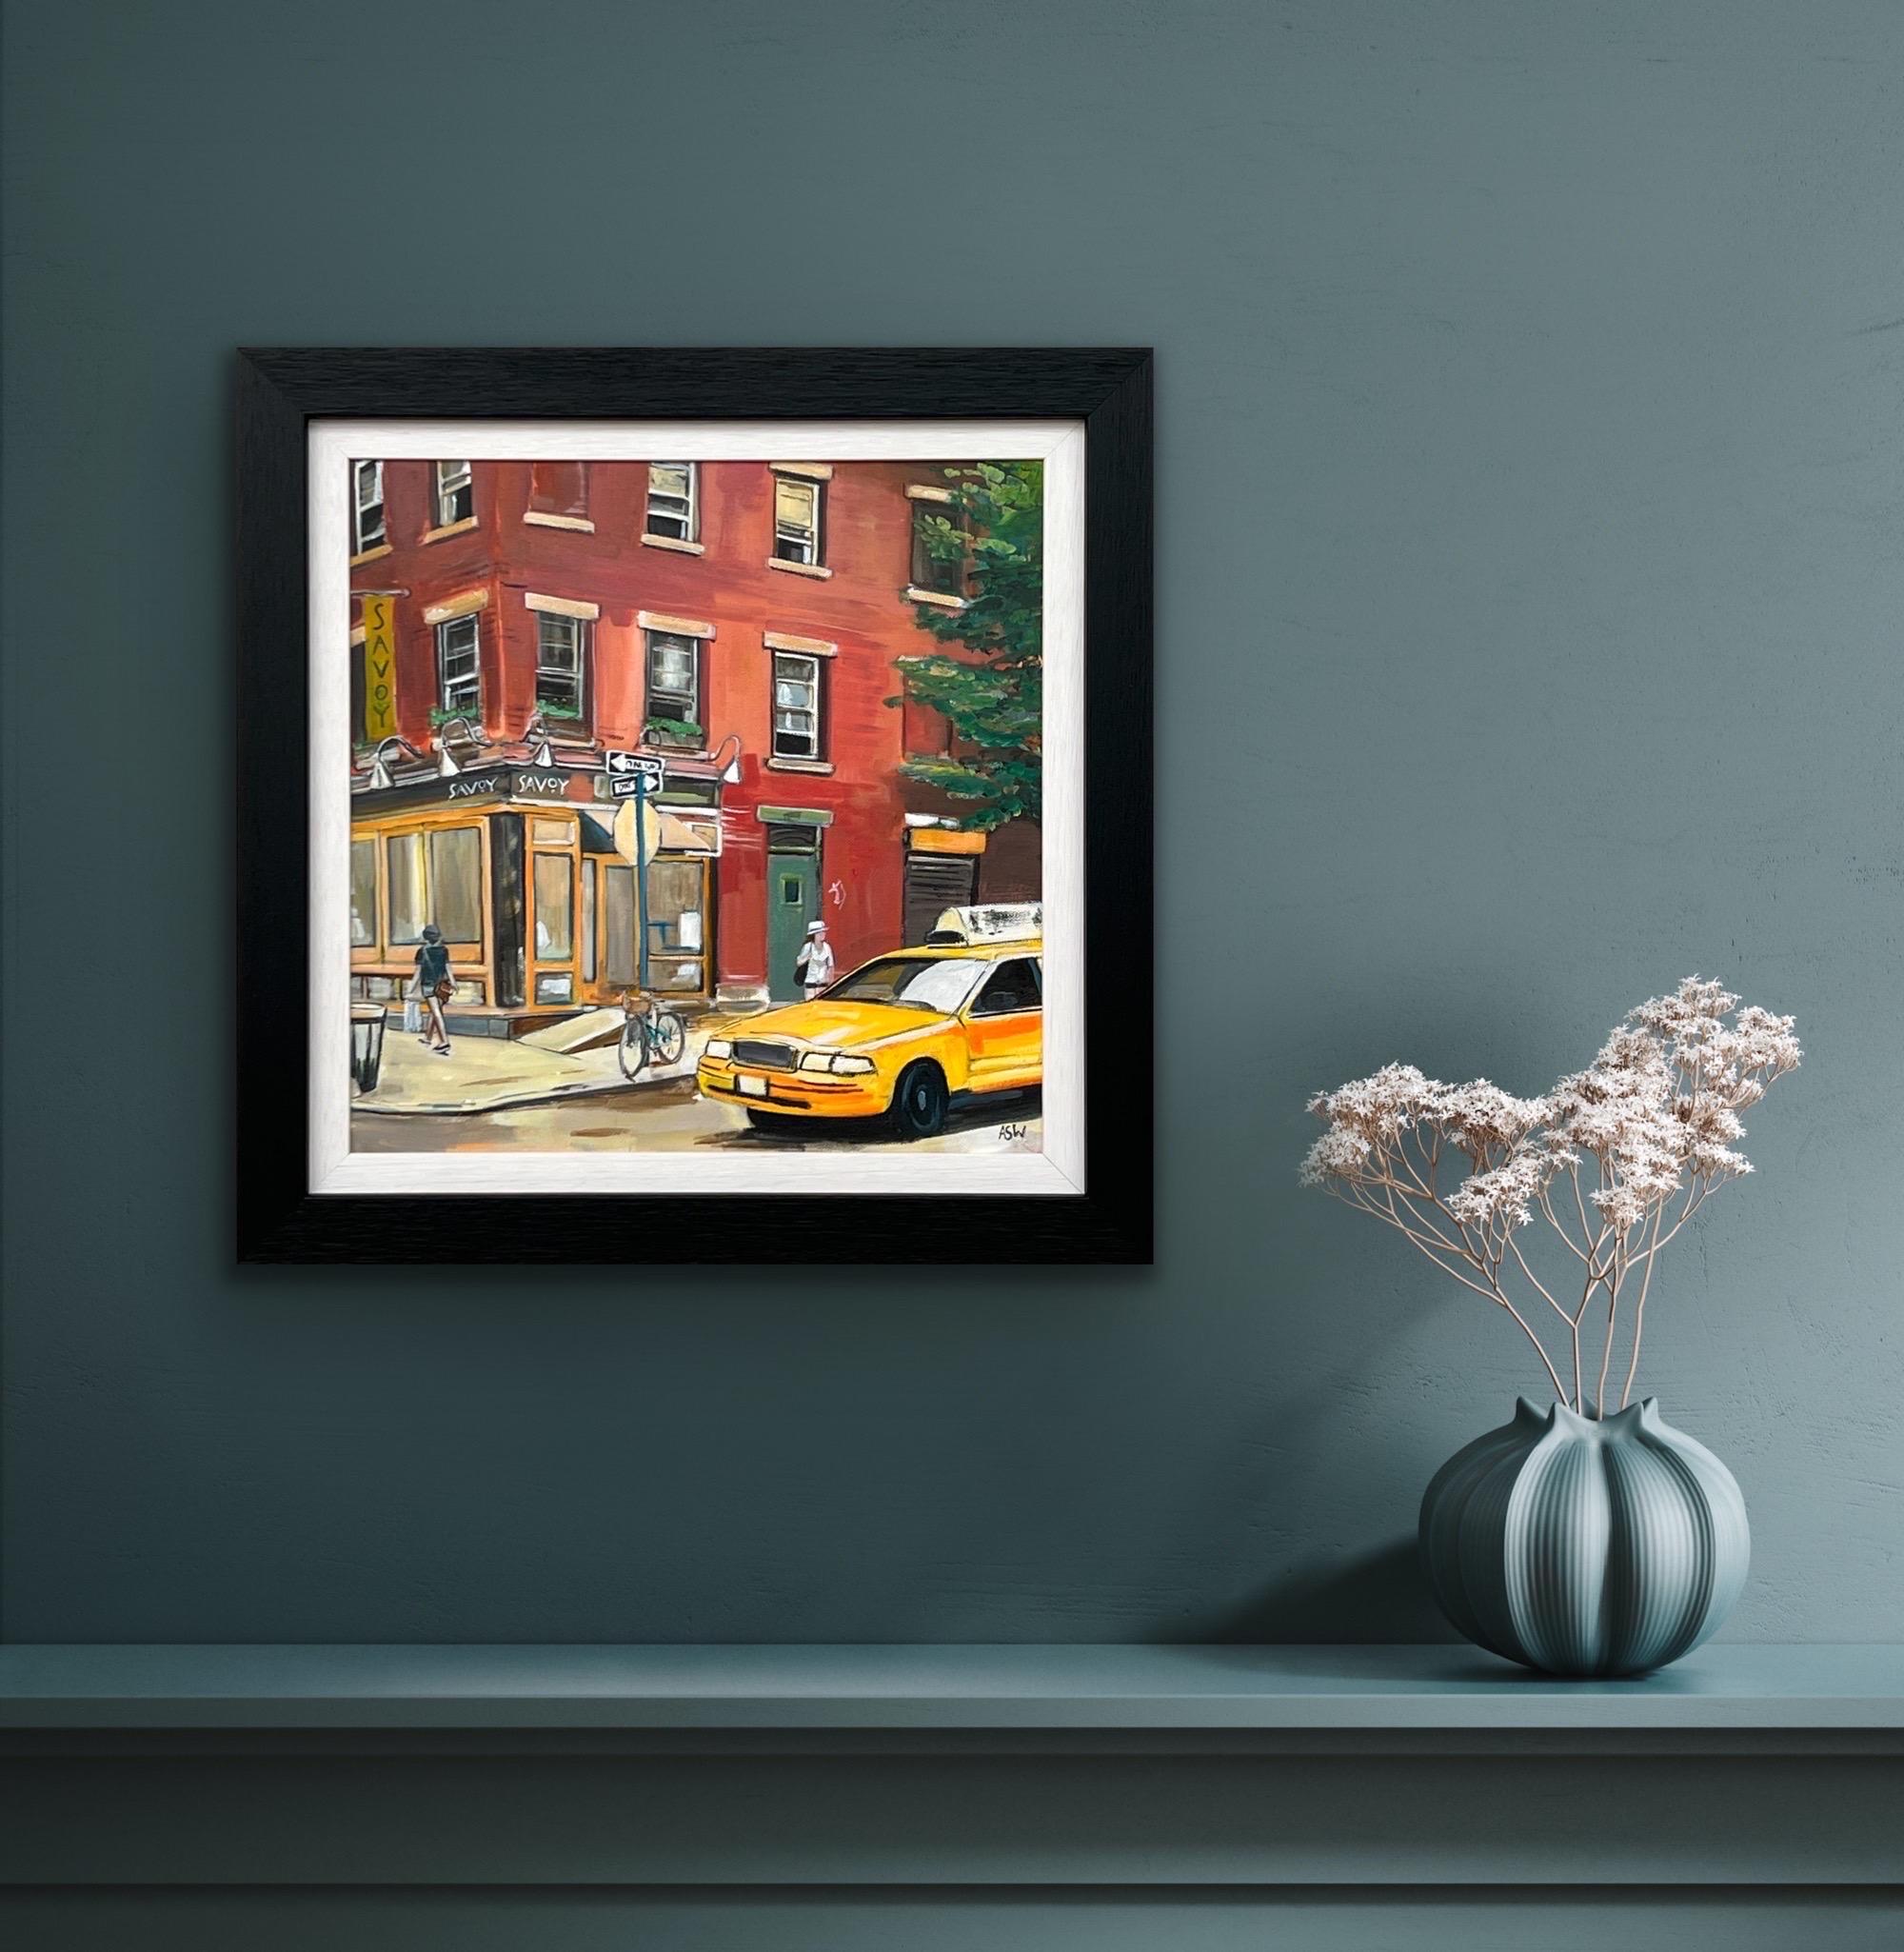 Painting of New York Street Corner Scene by Contemporary British Artist - Black Landscape Painting by Angela Wakefield